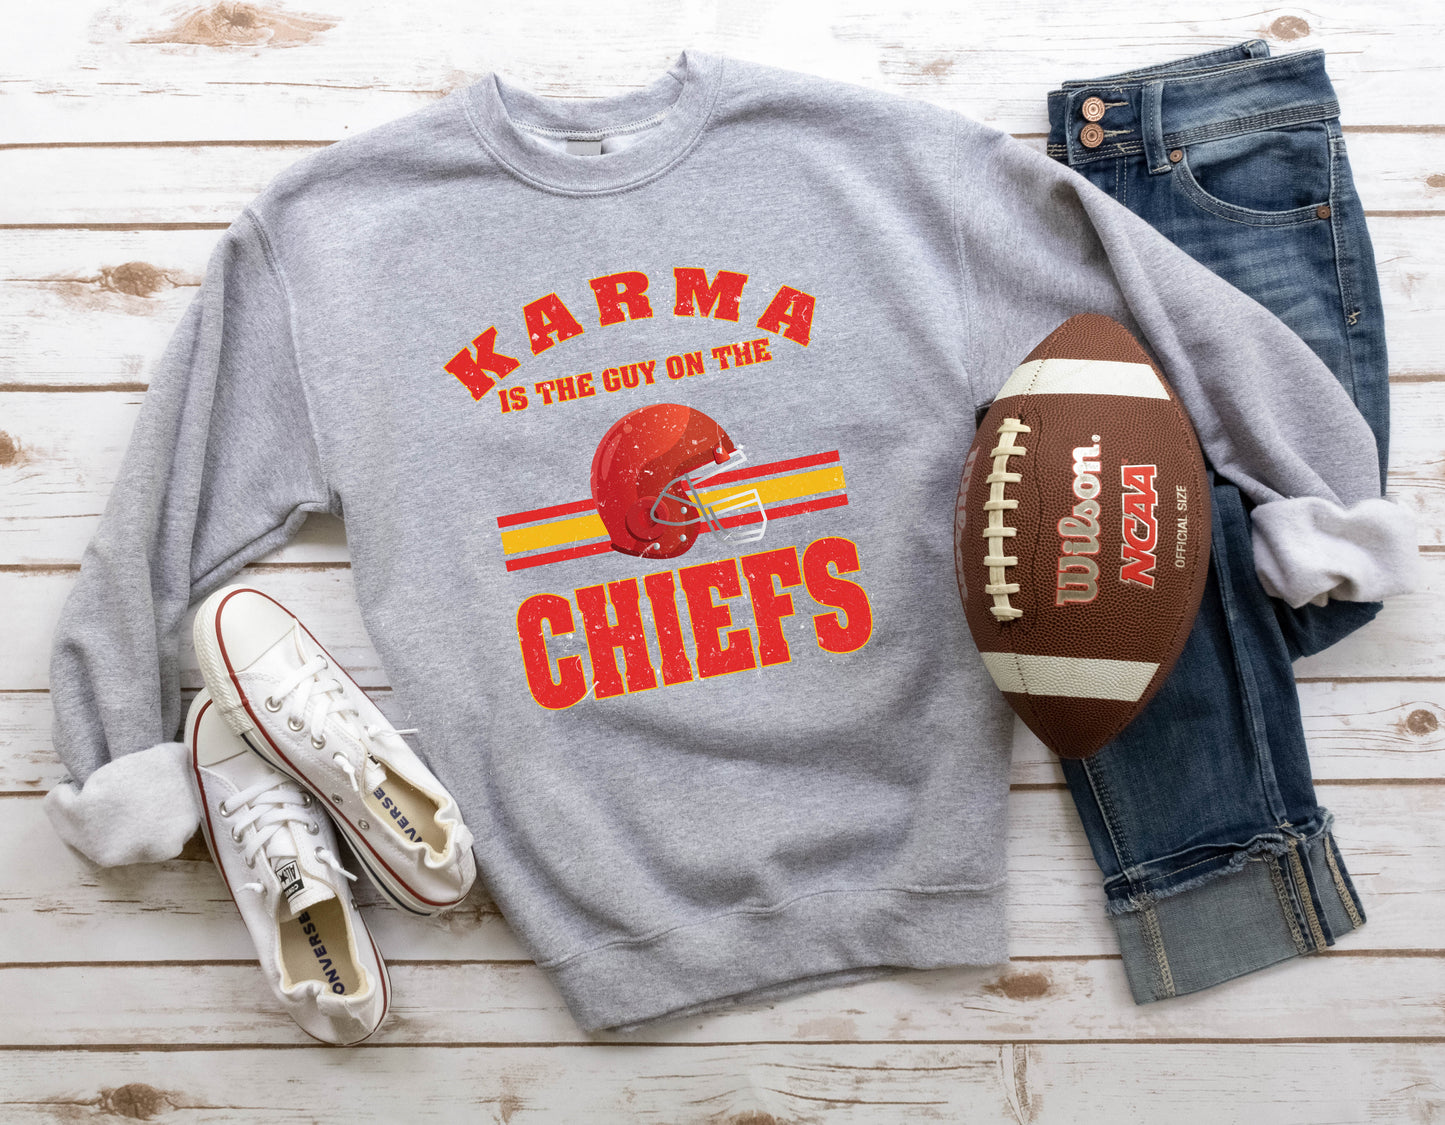 KARMA IS THE GUY ON THE CHIEFS